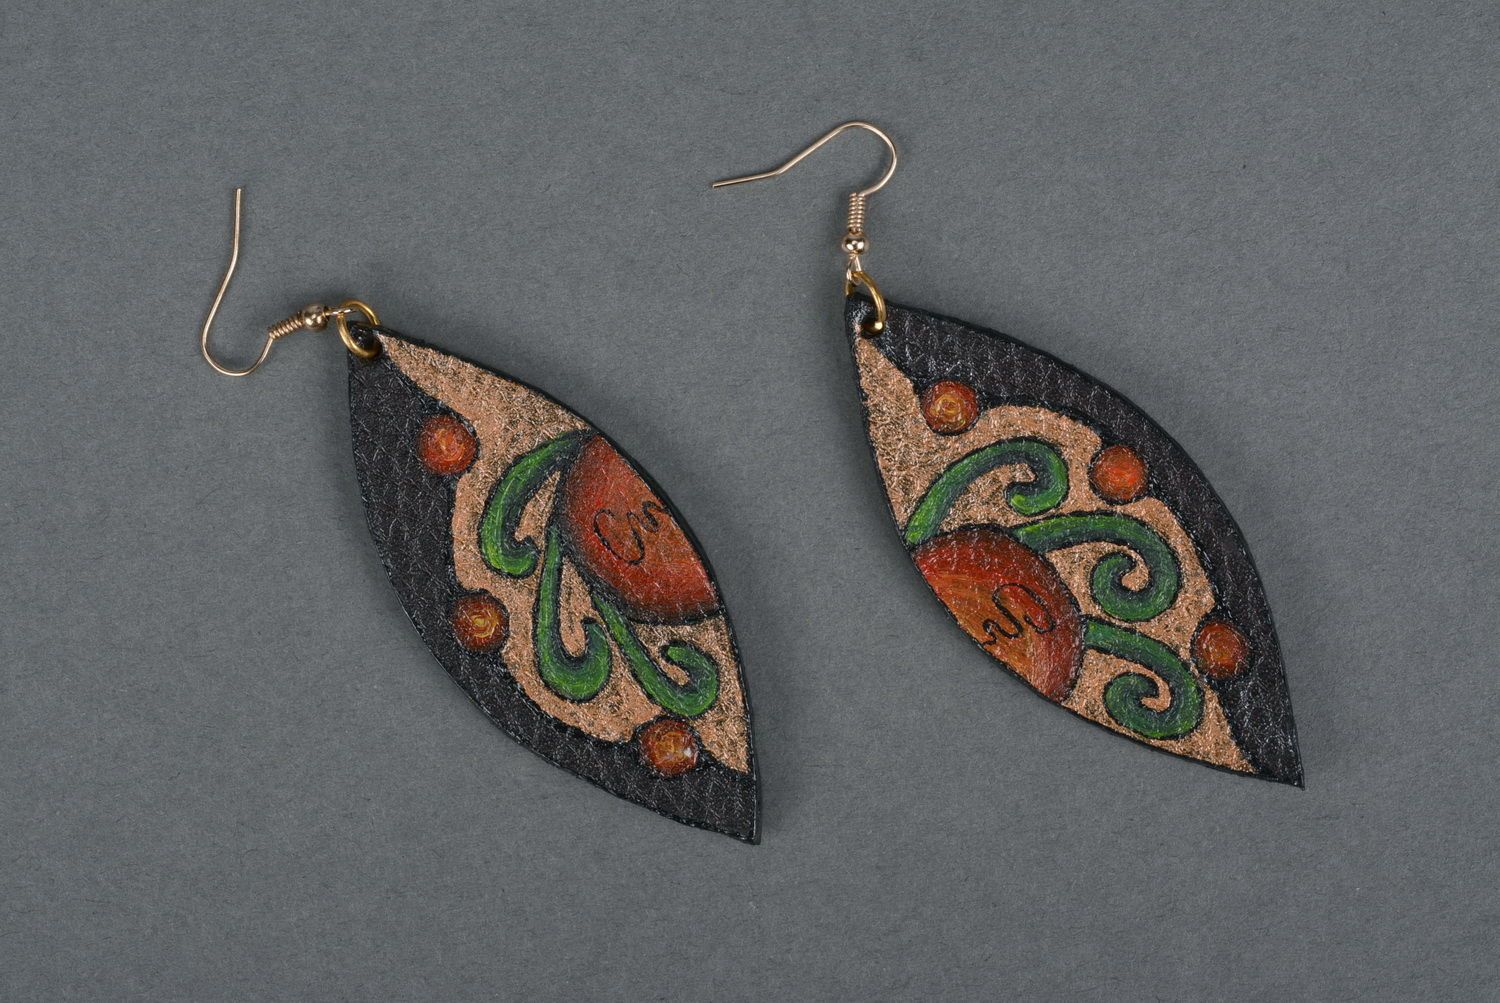 Earrings made of leather in ethnic style photo 1